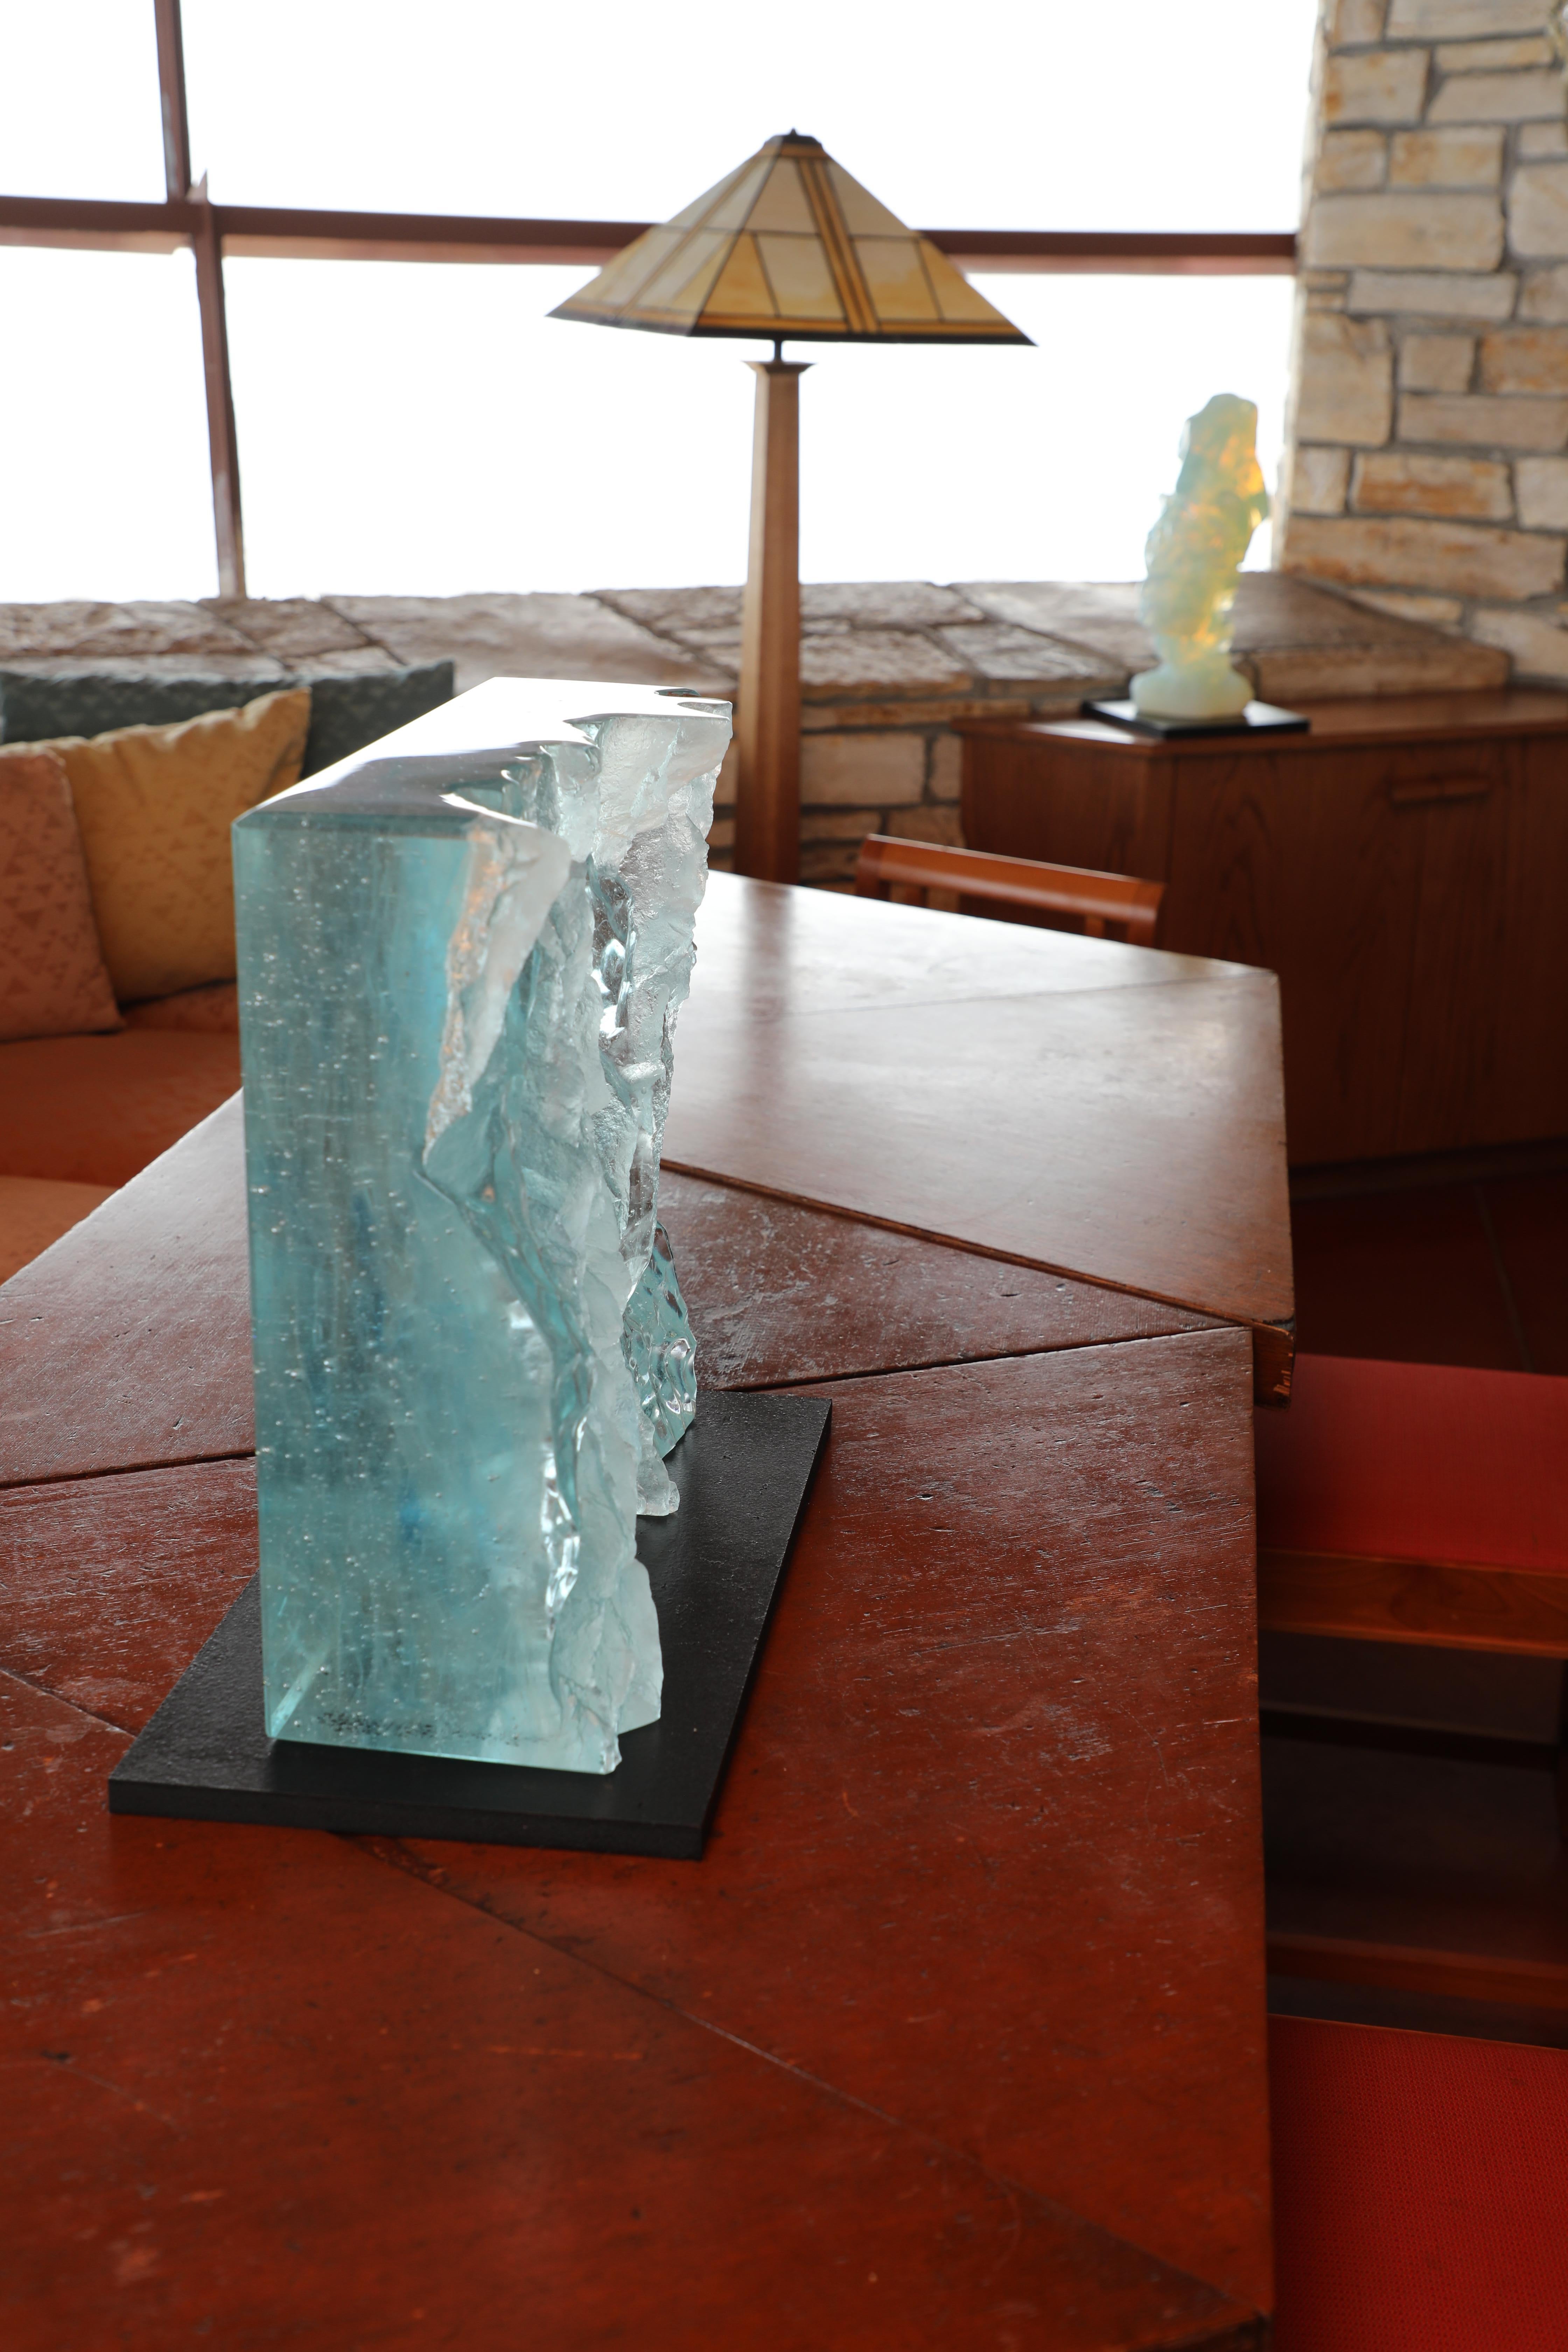 Contemporary Cast Glass Sculpture, 'Norsel 2', 2011 by David Ruth For Sale 2